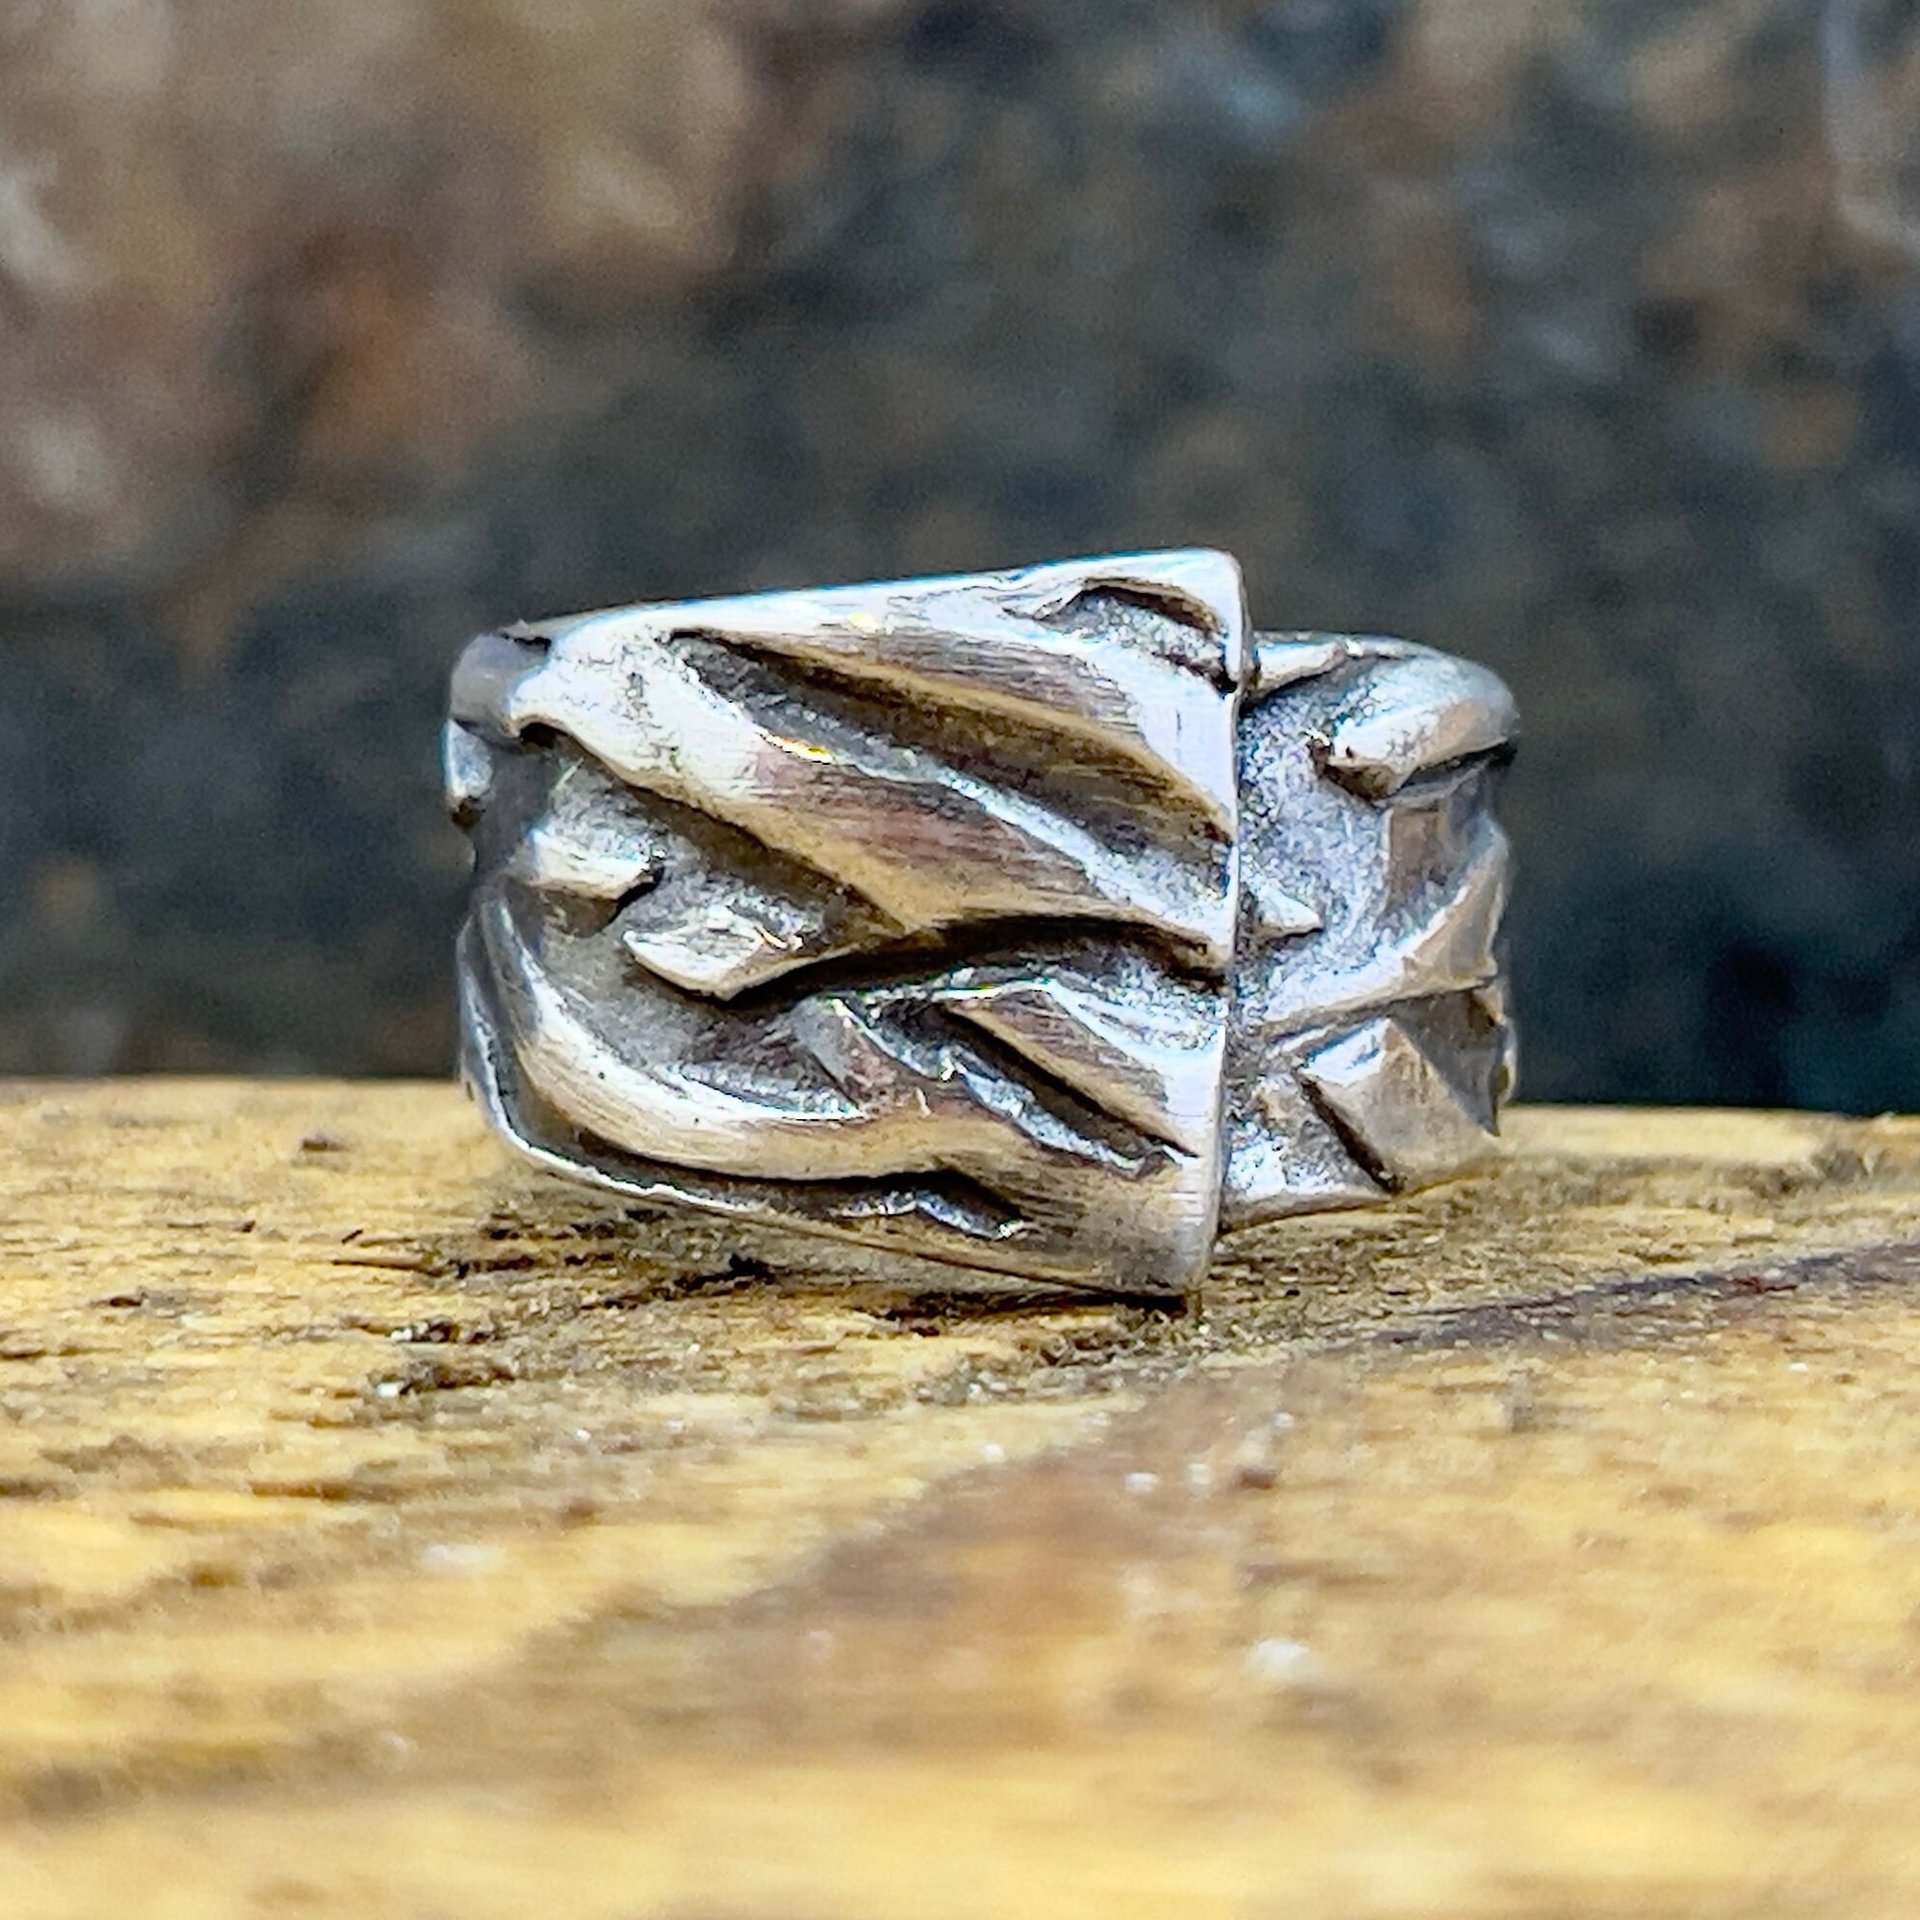 Silver Braid Ring, Sterling Silver 960, Wrap Ring, Braided Texture Ring, Wide Band Rings, Hand Crafted Art Jewelry, One of Kind Jewelry